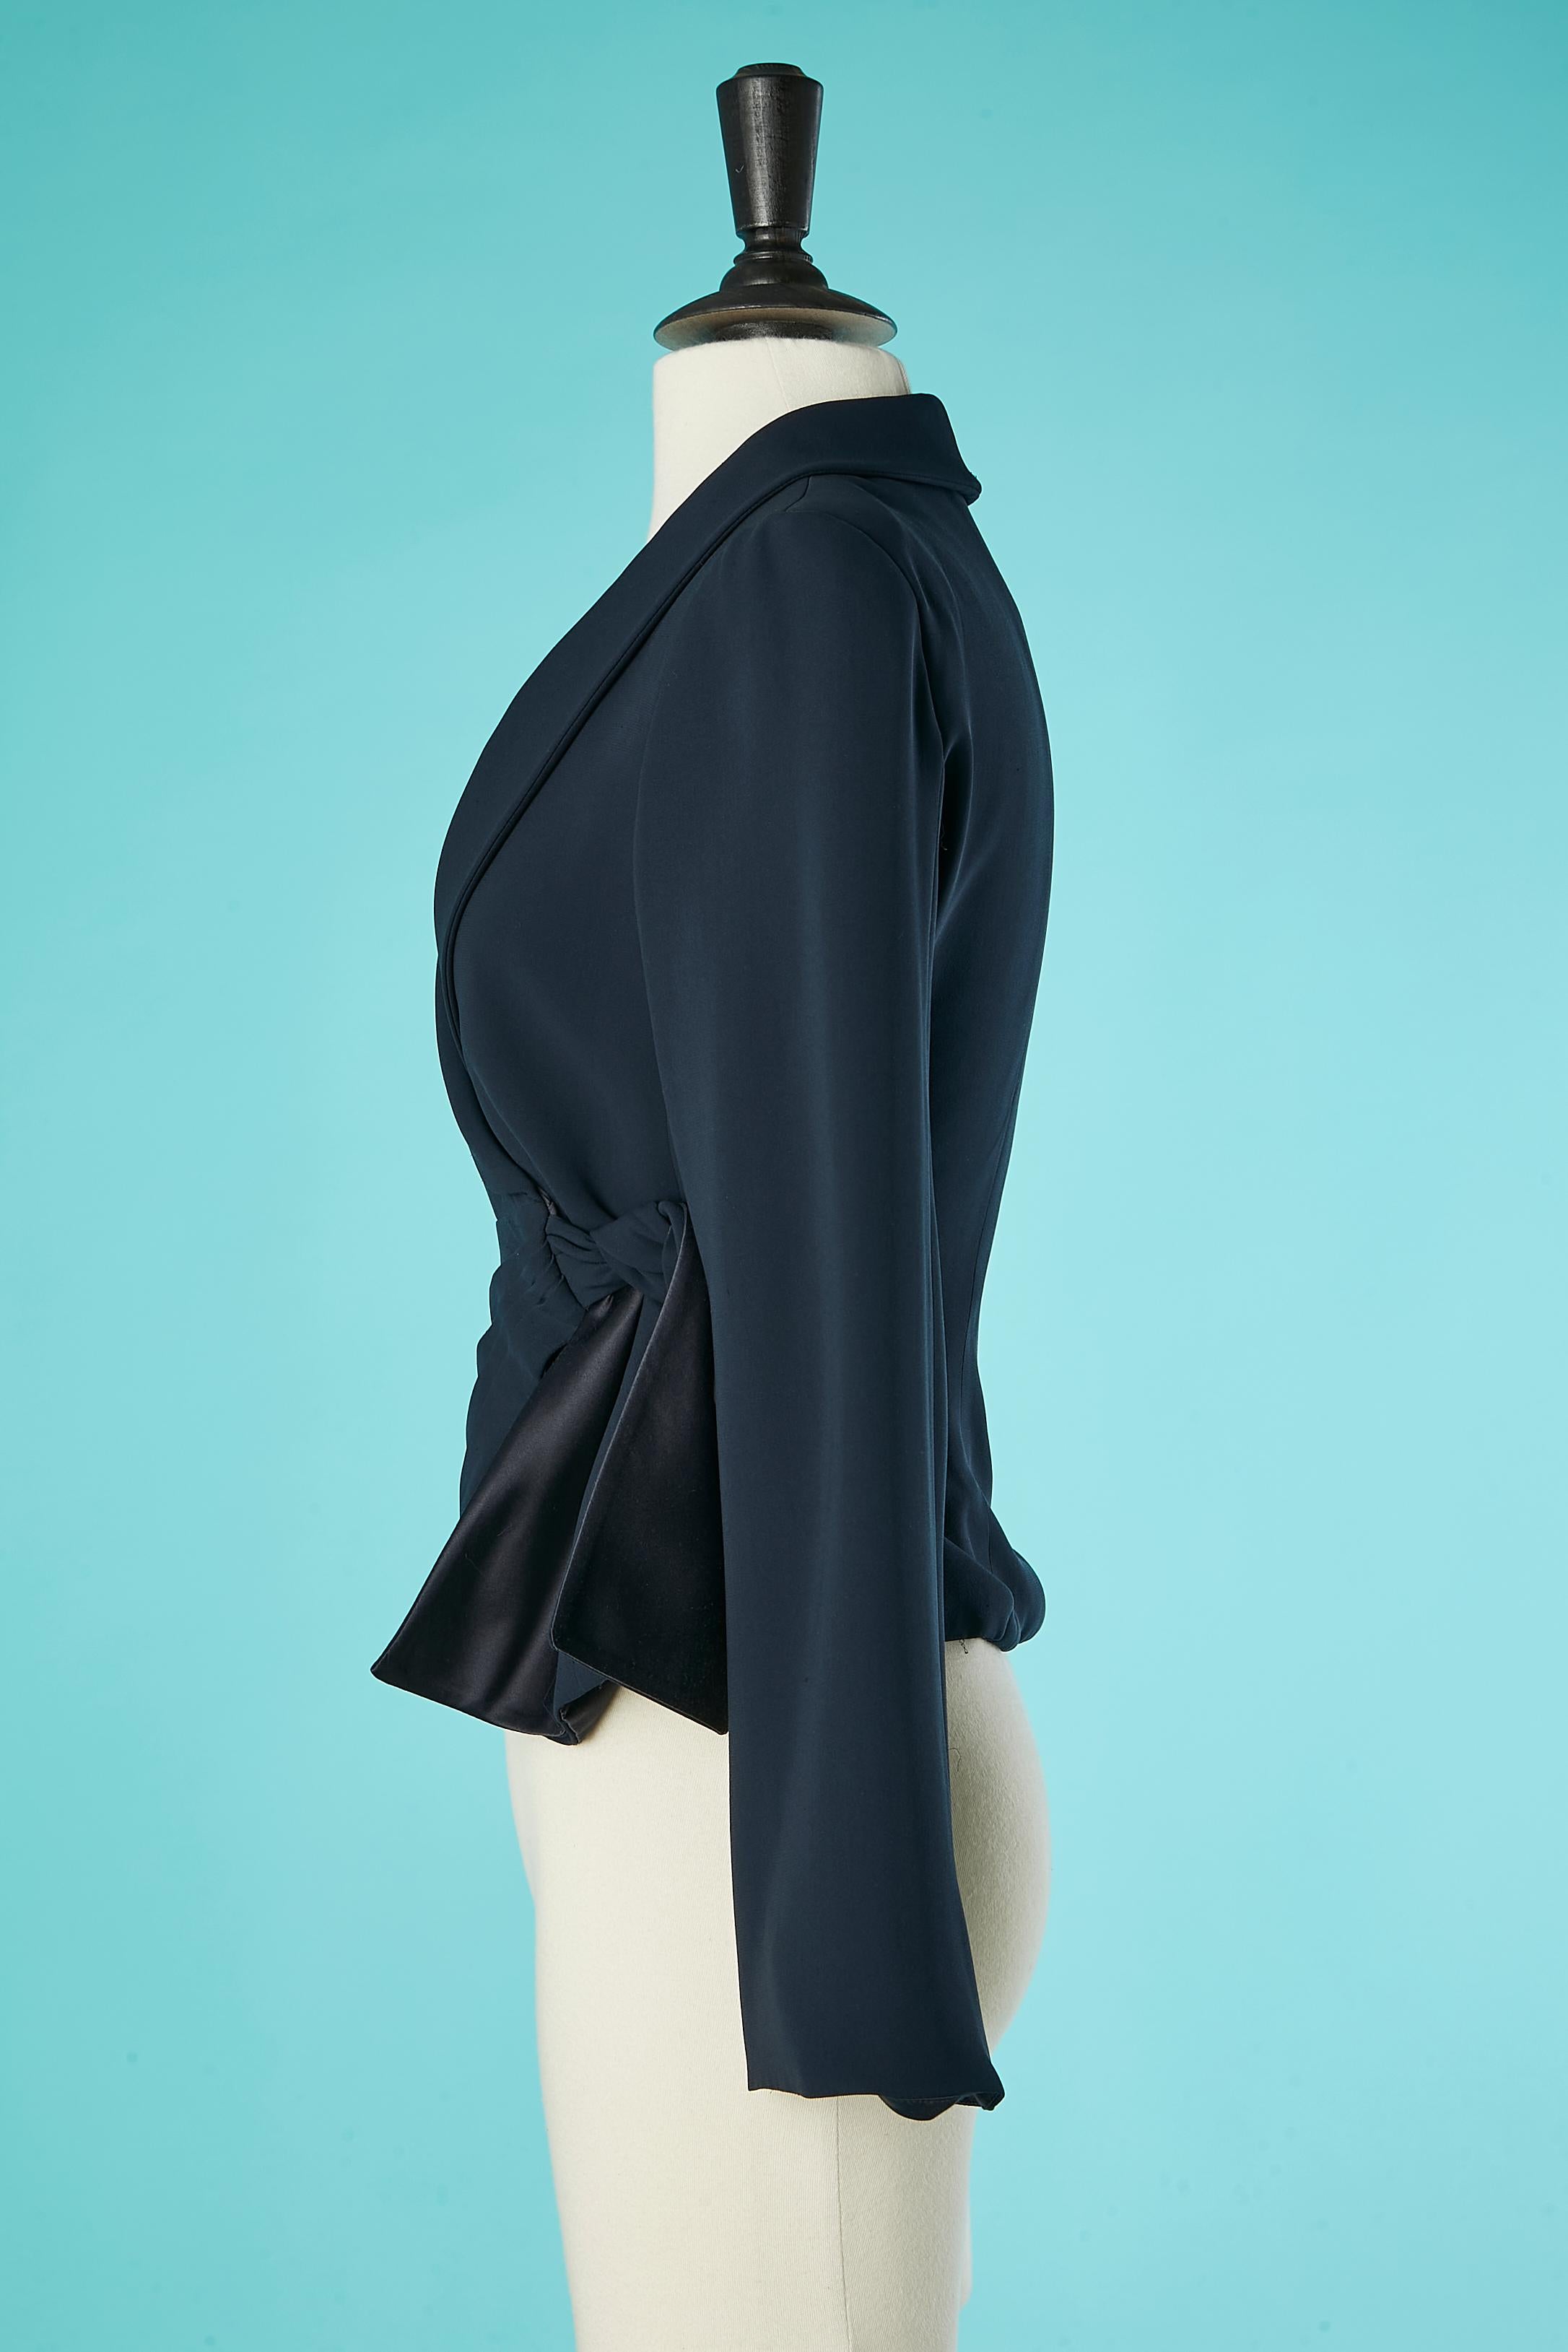 Navy blue wraped and draped double-breasted jacket Armani Collezioni  In Excellent Condition For Sale In Saint-Ouen-Sur-Seine, FR